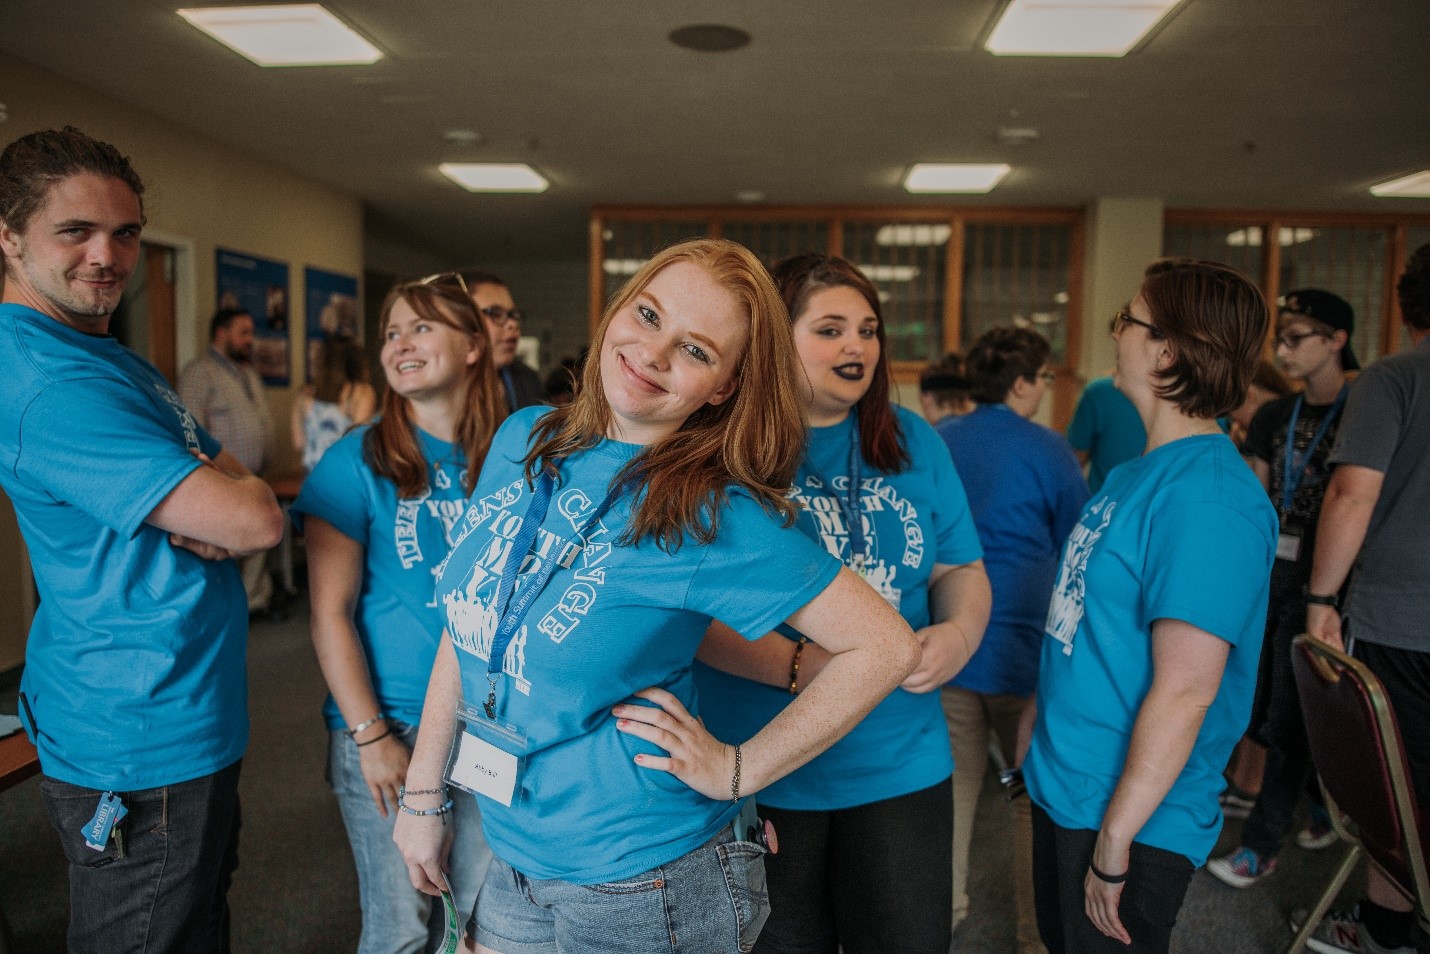 A teenage girl with red hair smiles for the camera surrounded by other kids her age. They are all wearing light blue shirts and are socializing among themselves at an event.